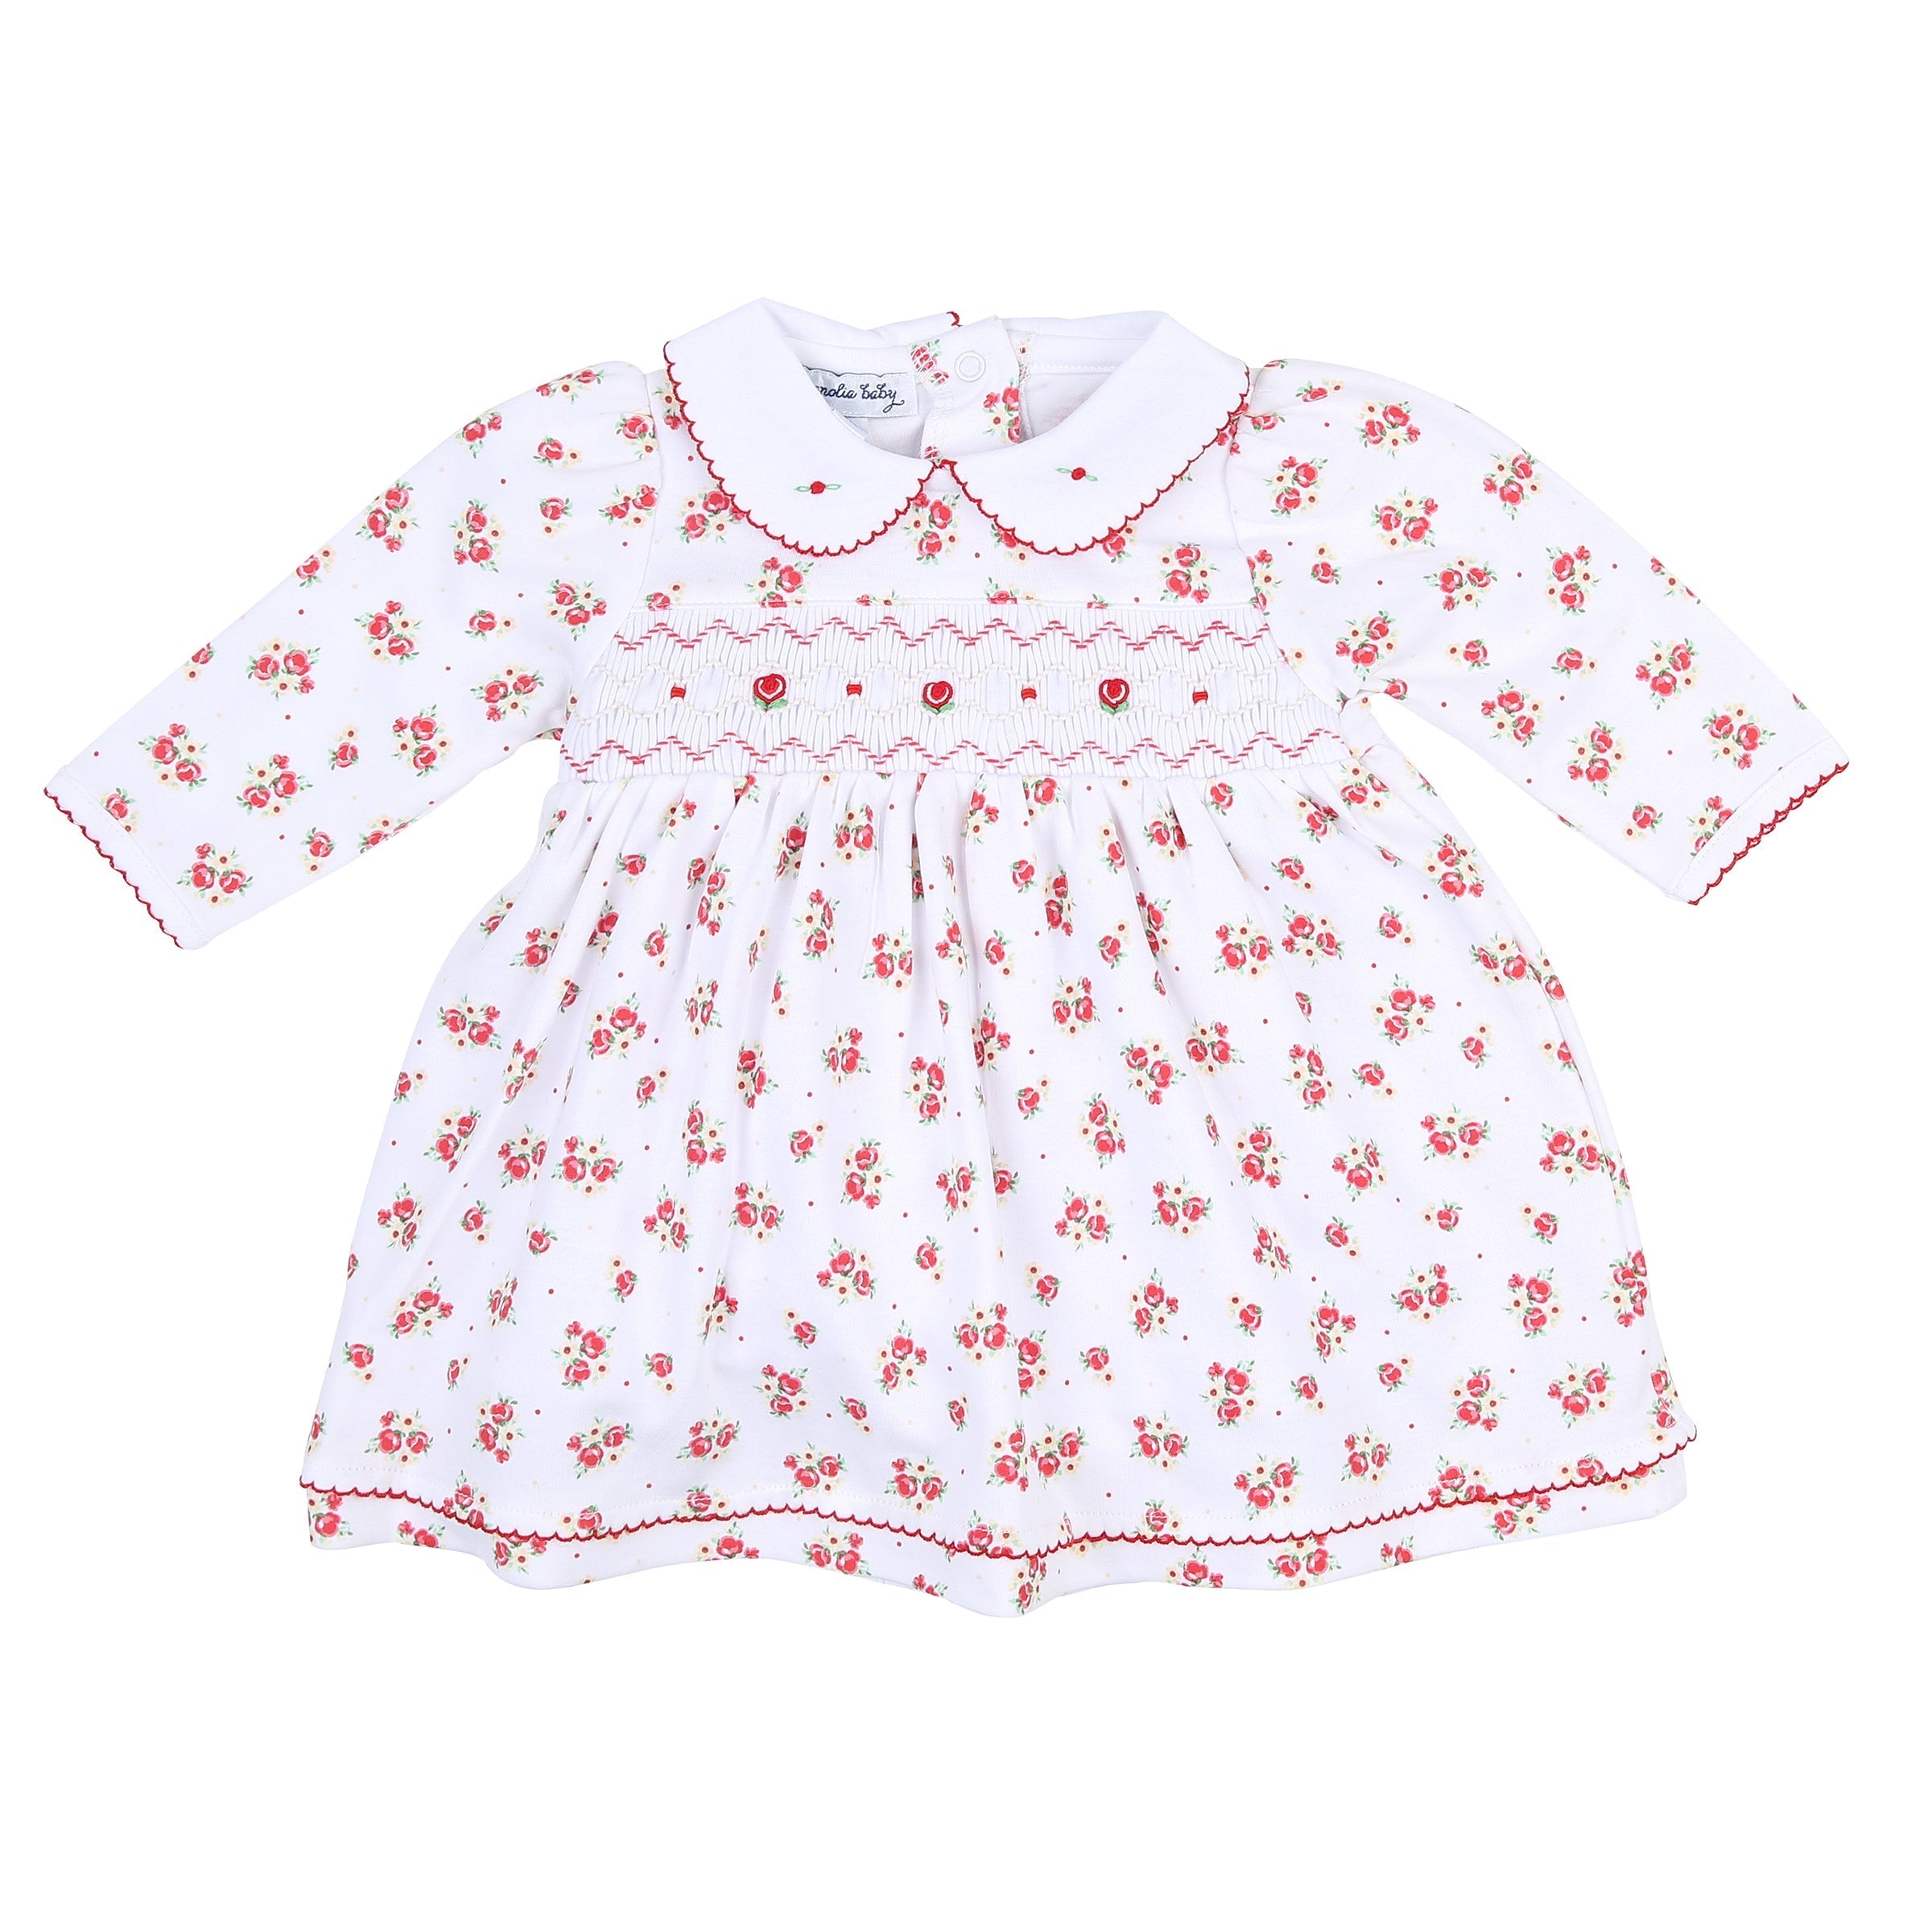 Holiday Annalise's Classics Smocked Dress + Diaper Cover